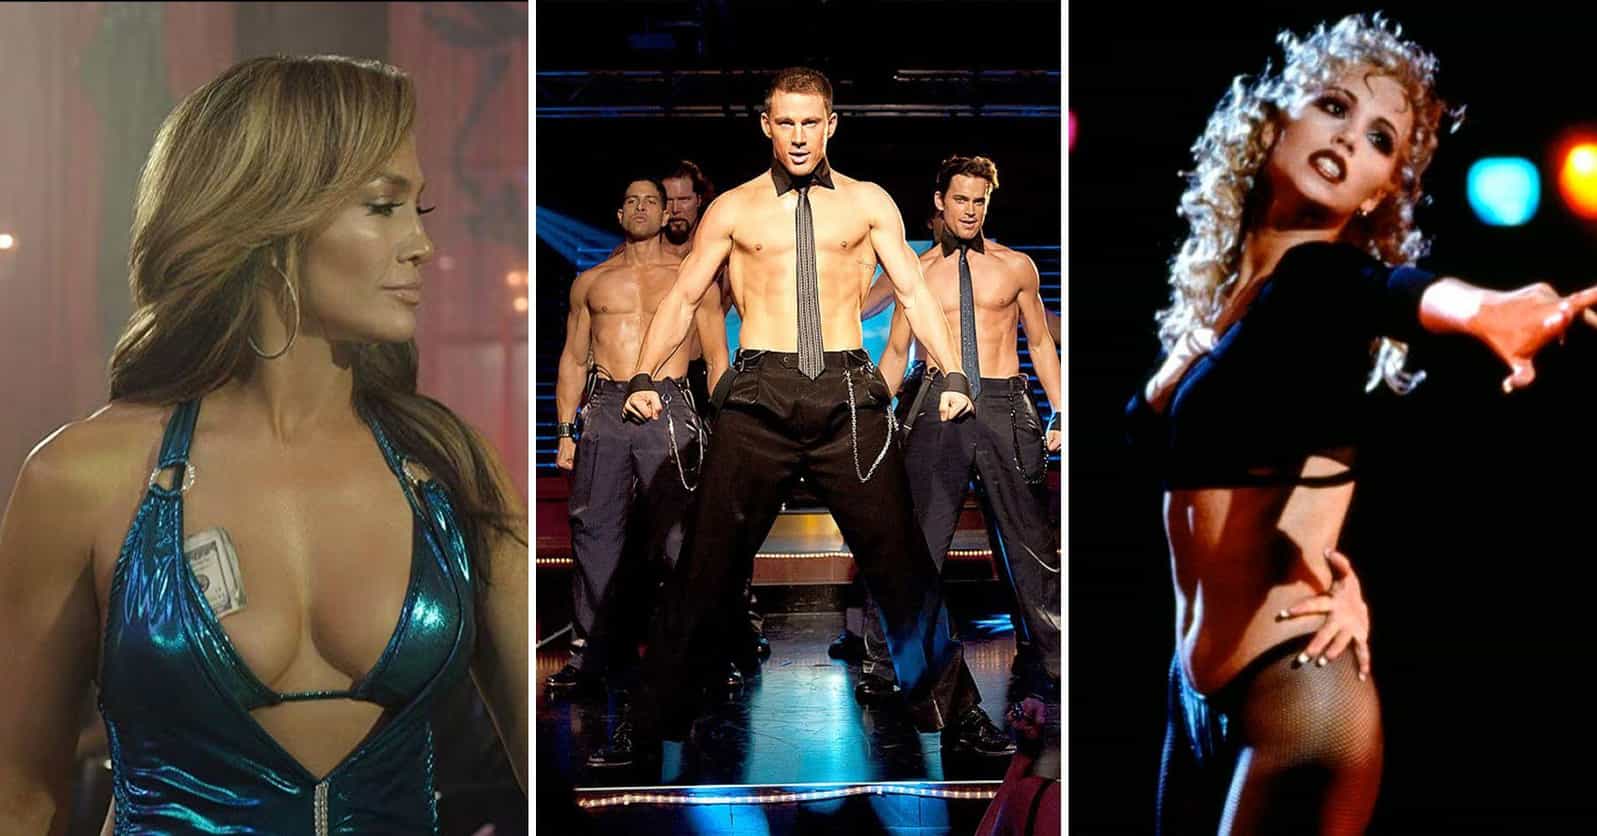 The 18 Best Movies Featuring Strippers That Will Have You Making It Rain